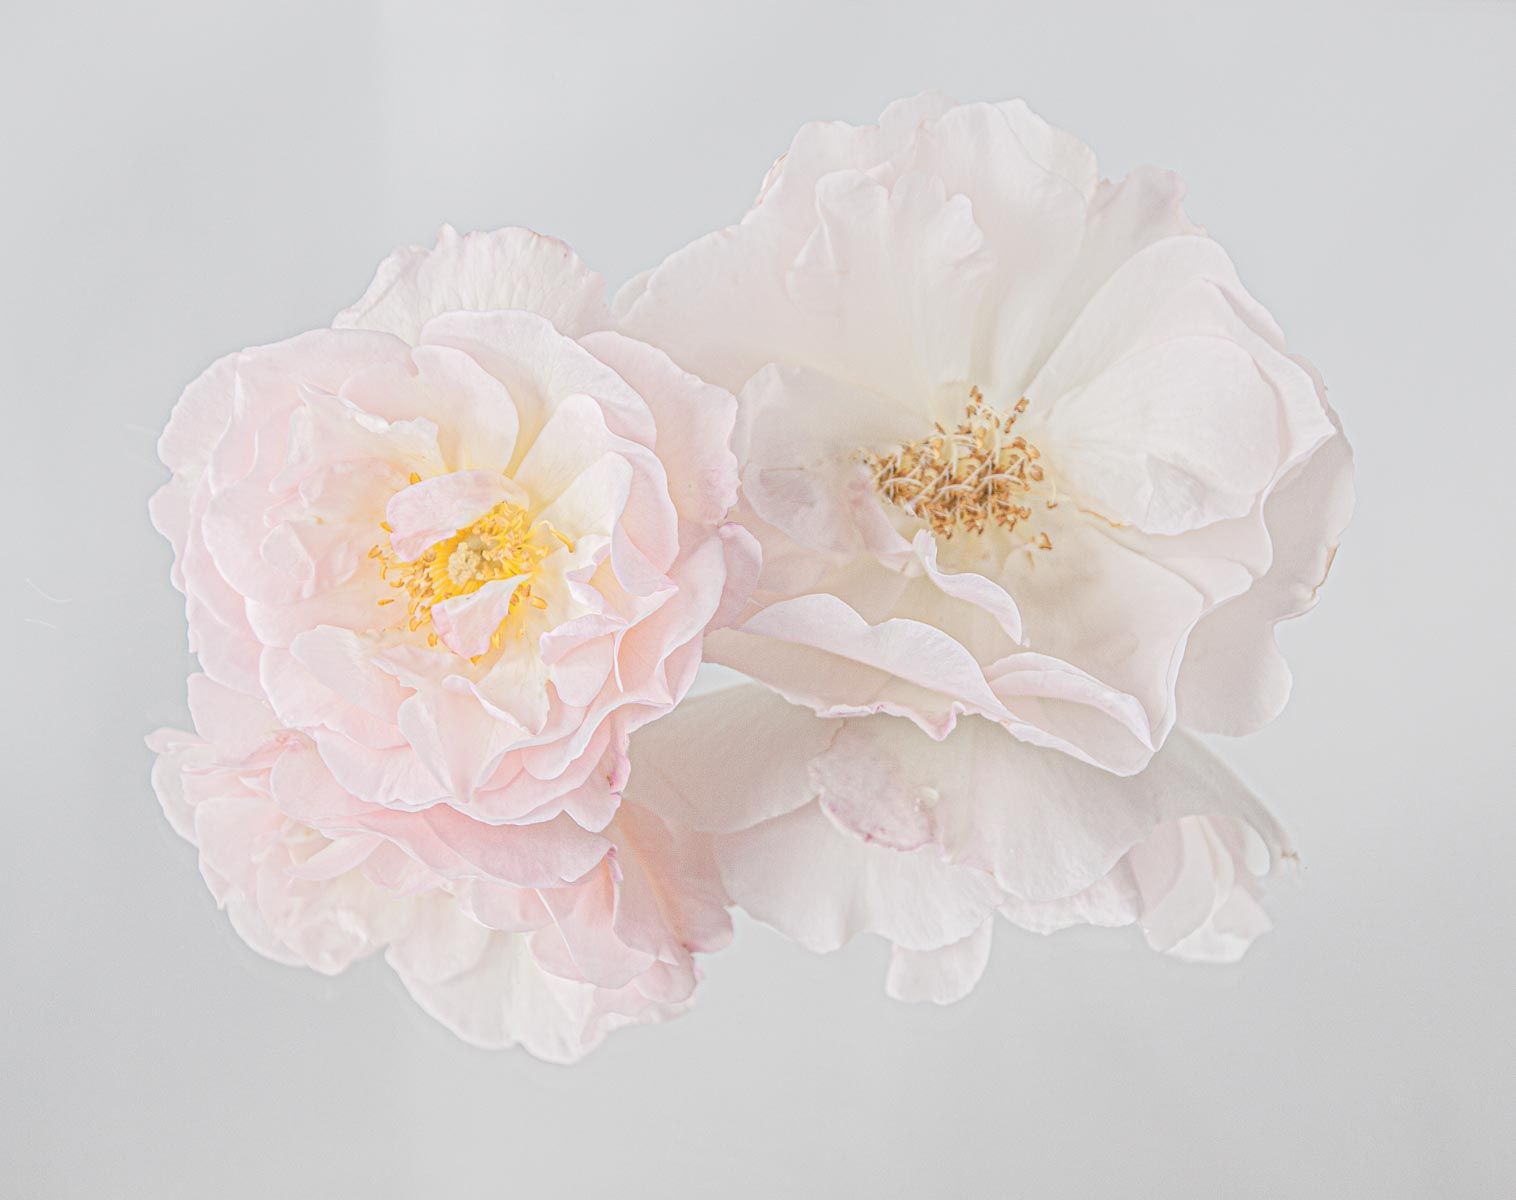 Two delicate pink roses with soft petals, one fully open and the other partially, are photographed against a white background, casting a subtle reflection below, illustrating a gentle and pure aesthetic.